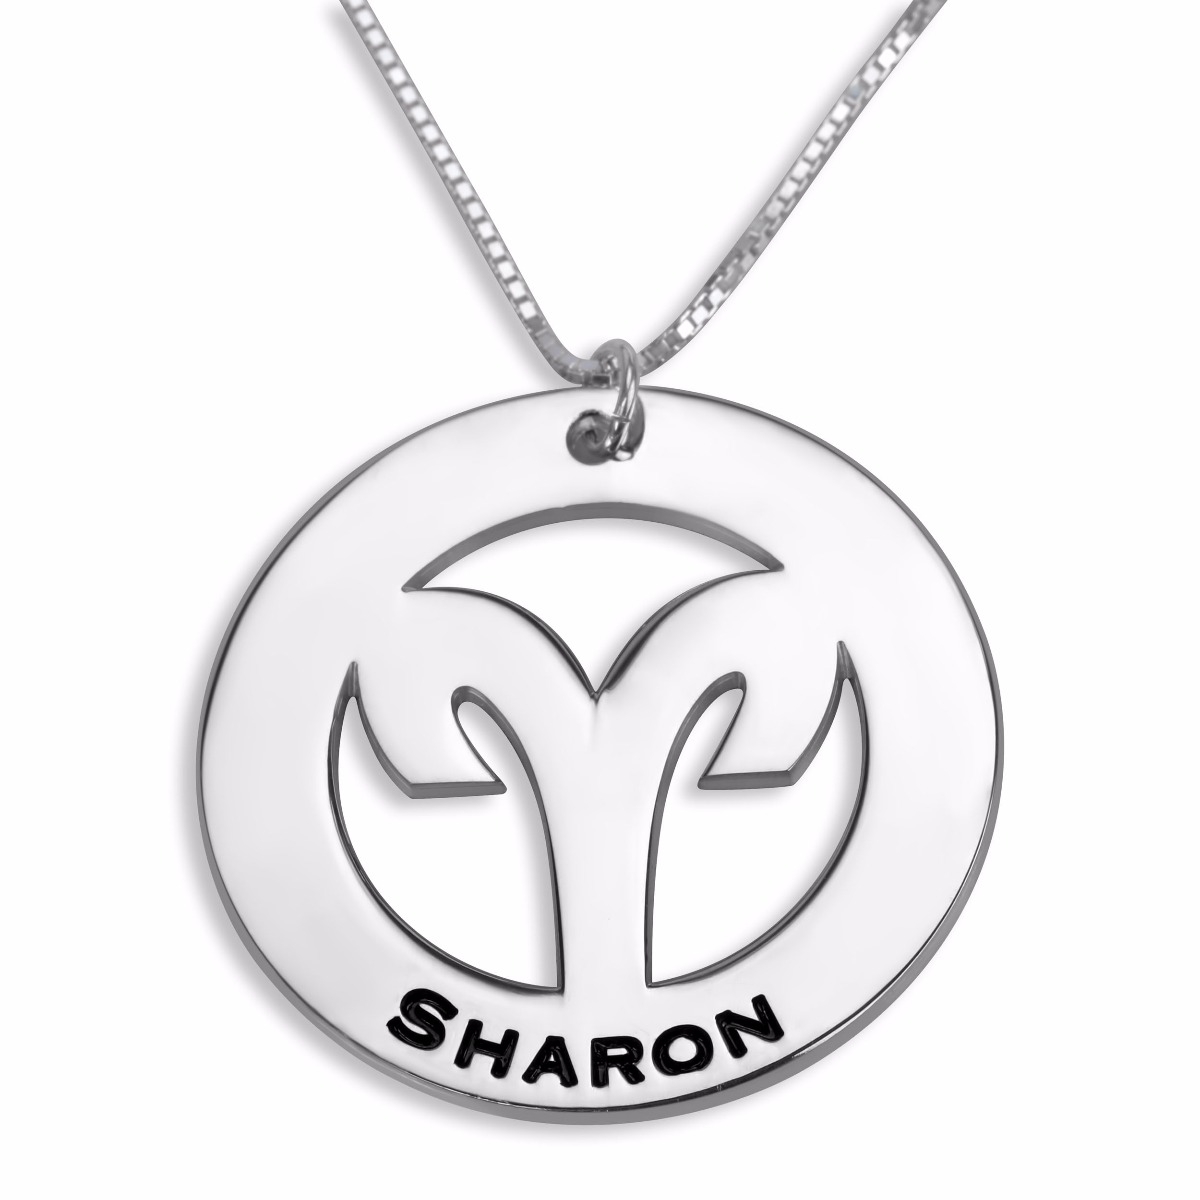 Hebrew Name Necklace Double Thickness Silver Aries Zodiac Name Necklace (English/Hebrew)  - 1